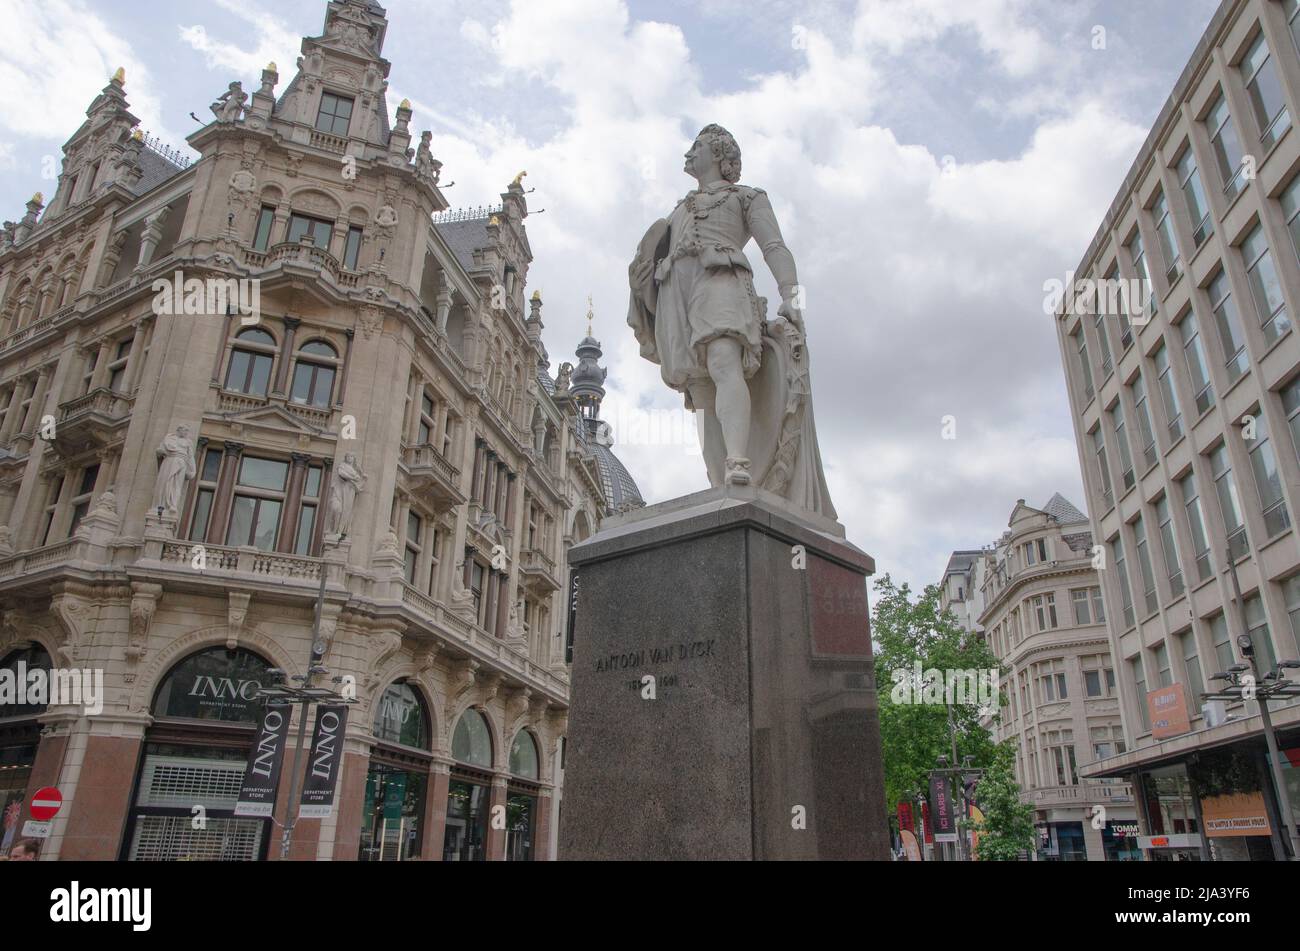 Antwerp may 2022: The statue of the famous Flemish painter Sir Anthony Van Dyck (1599-1641) in Antwerp. Stock Photo